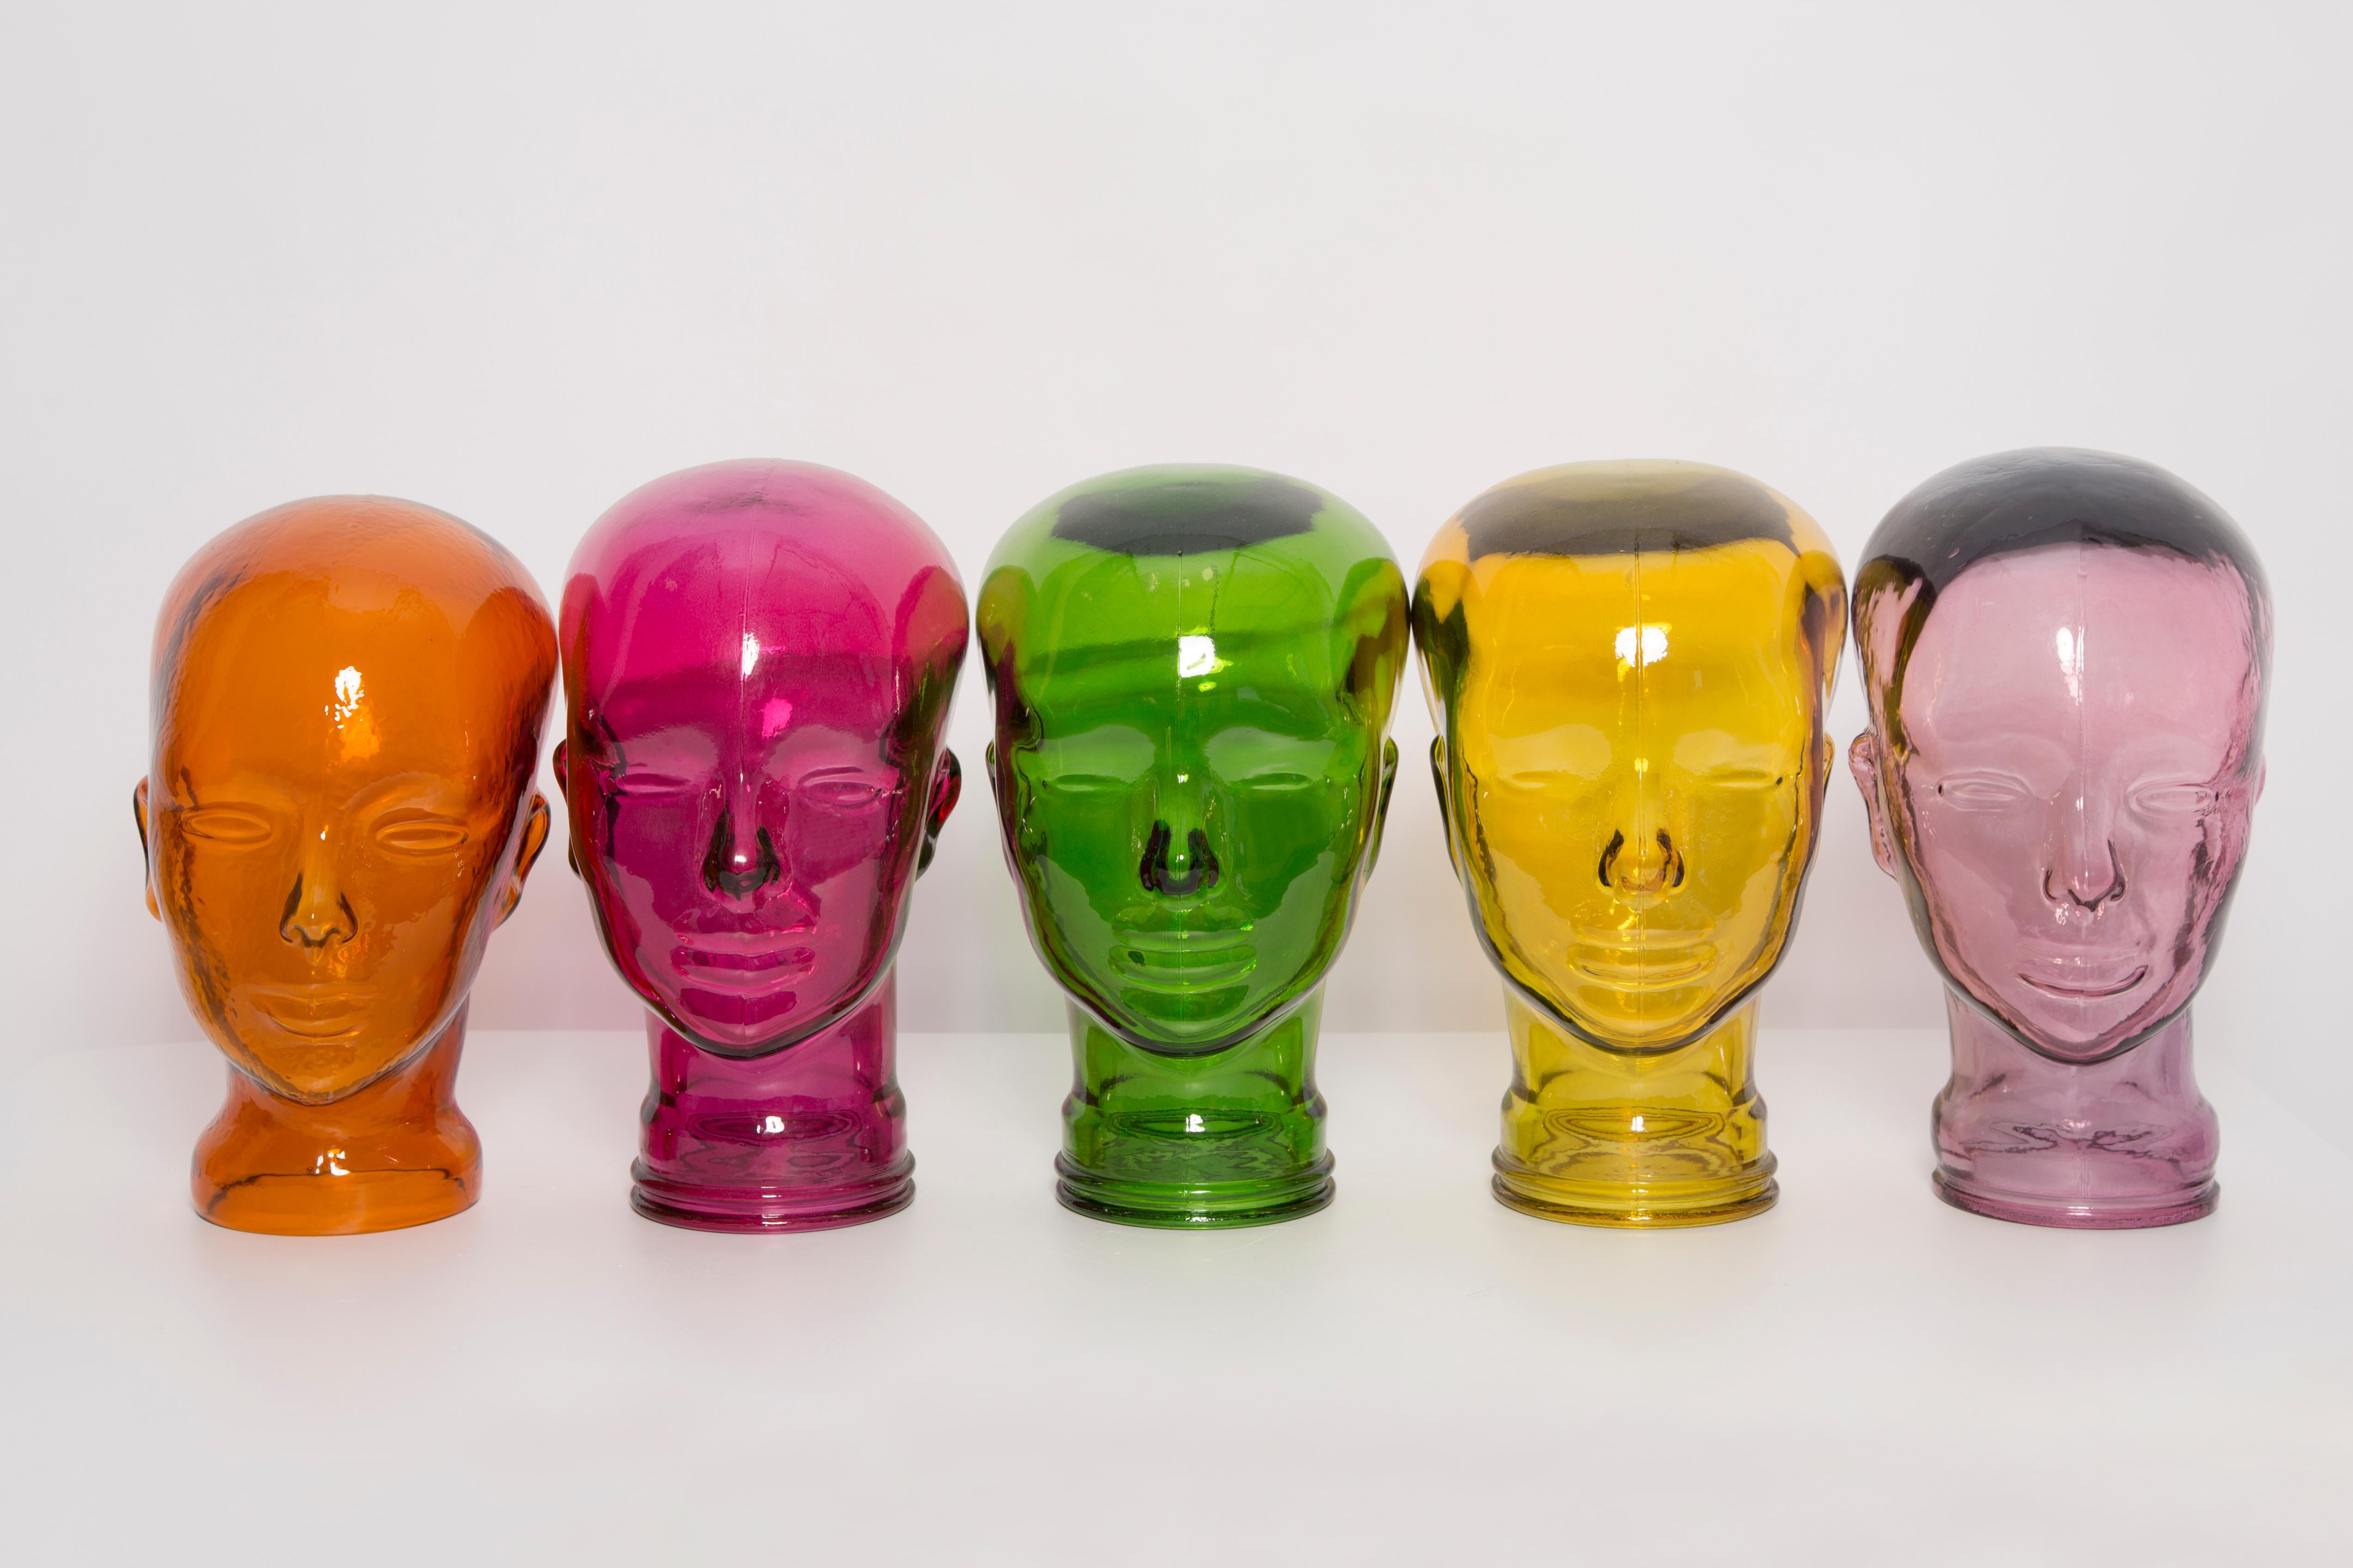 Set of 5 Life-size glass heads in a unique deep colors. Produced in a German steelworks in the 1970s. Perfect condition. A perfect addition to the interior, photo prop, display or headphone stand. Only one unique set.